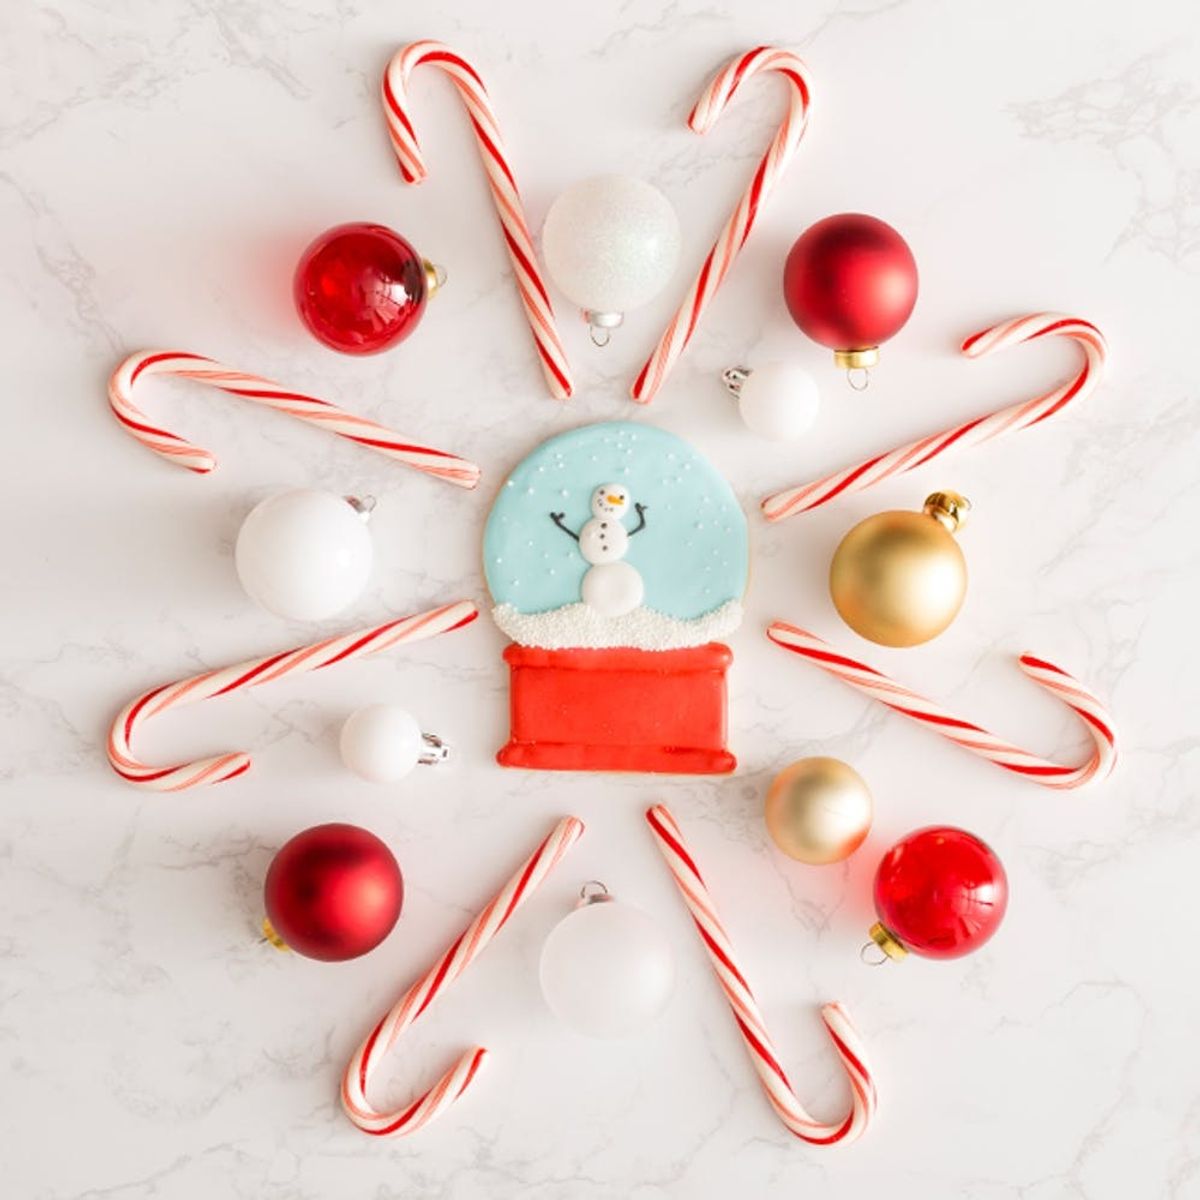 Learn How to Decorate Cookies With Royal Icing (+ Get 40% Off For a Limited Time!)